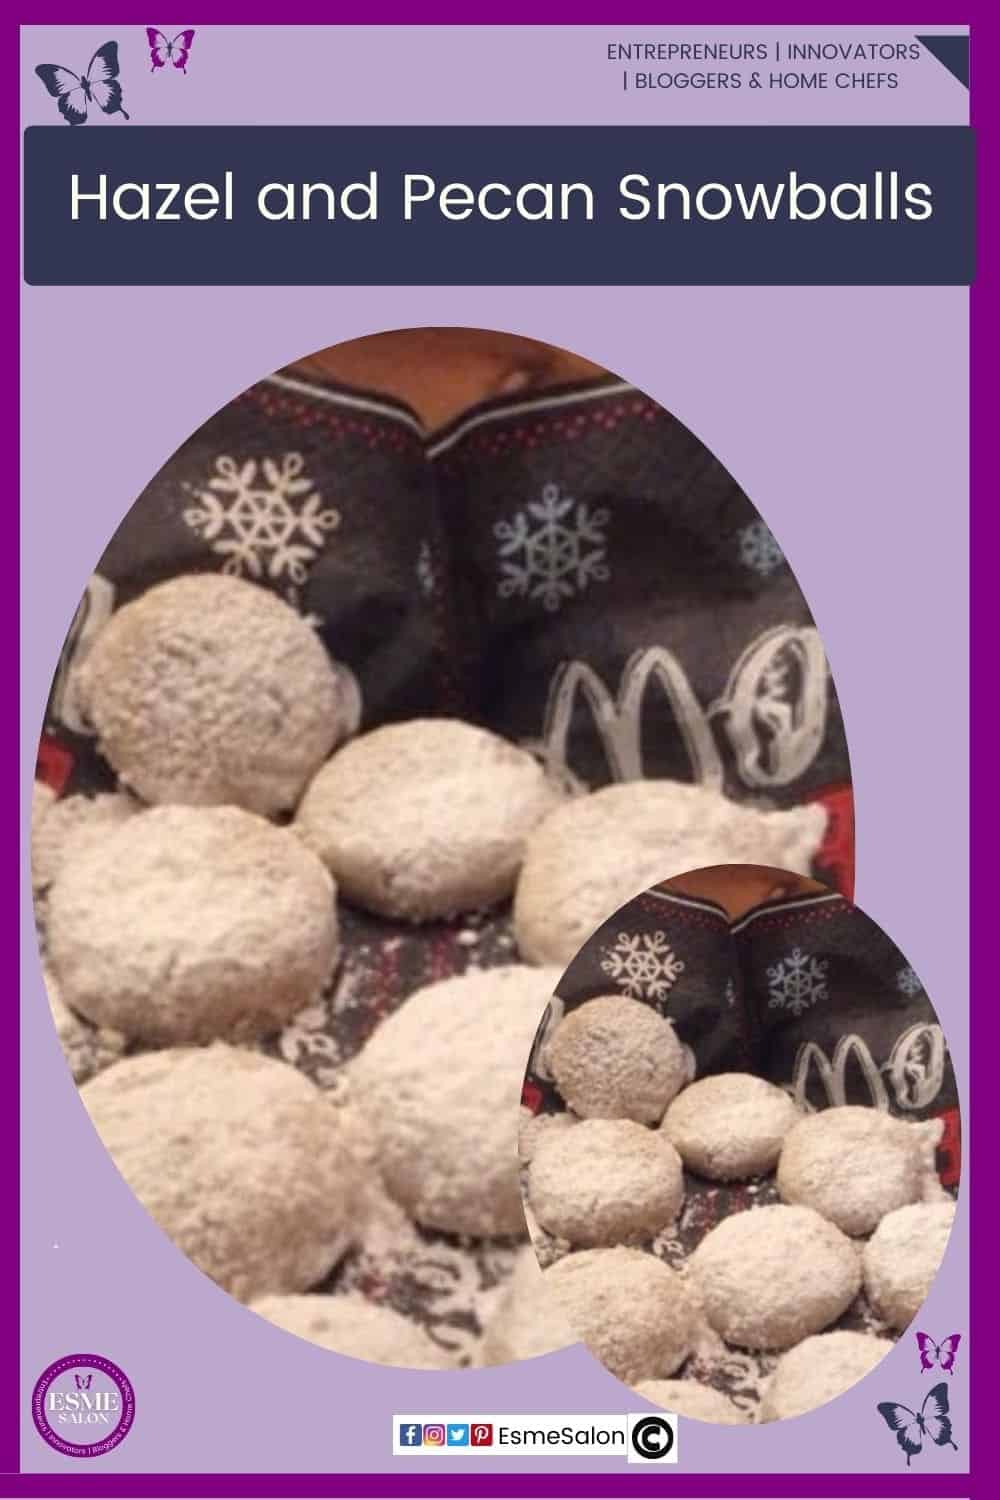 an image of a bunch of Hazel and Pecan Snowballs made of ground nuts and placed on a "let it snow" napkin